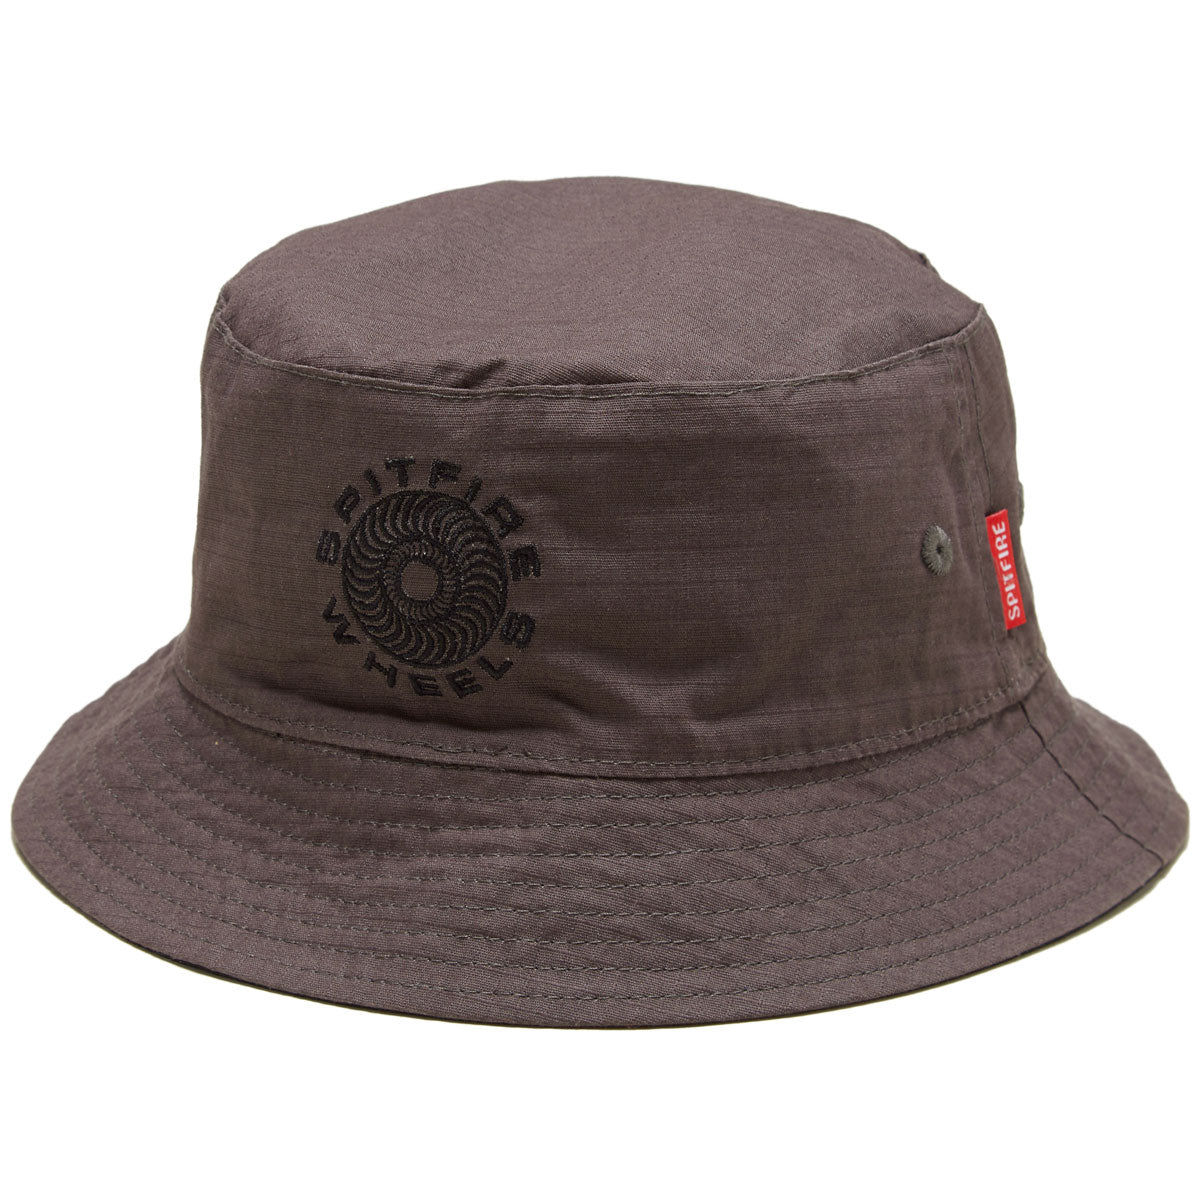 Spitfire Classic 87 Reversible Hat - Charcoal/Black image 1